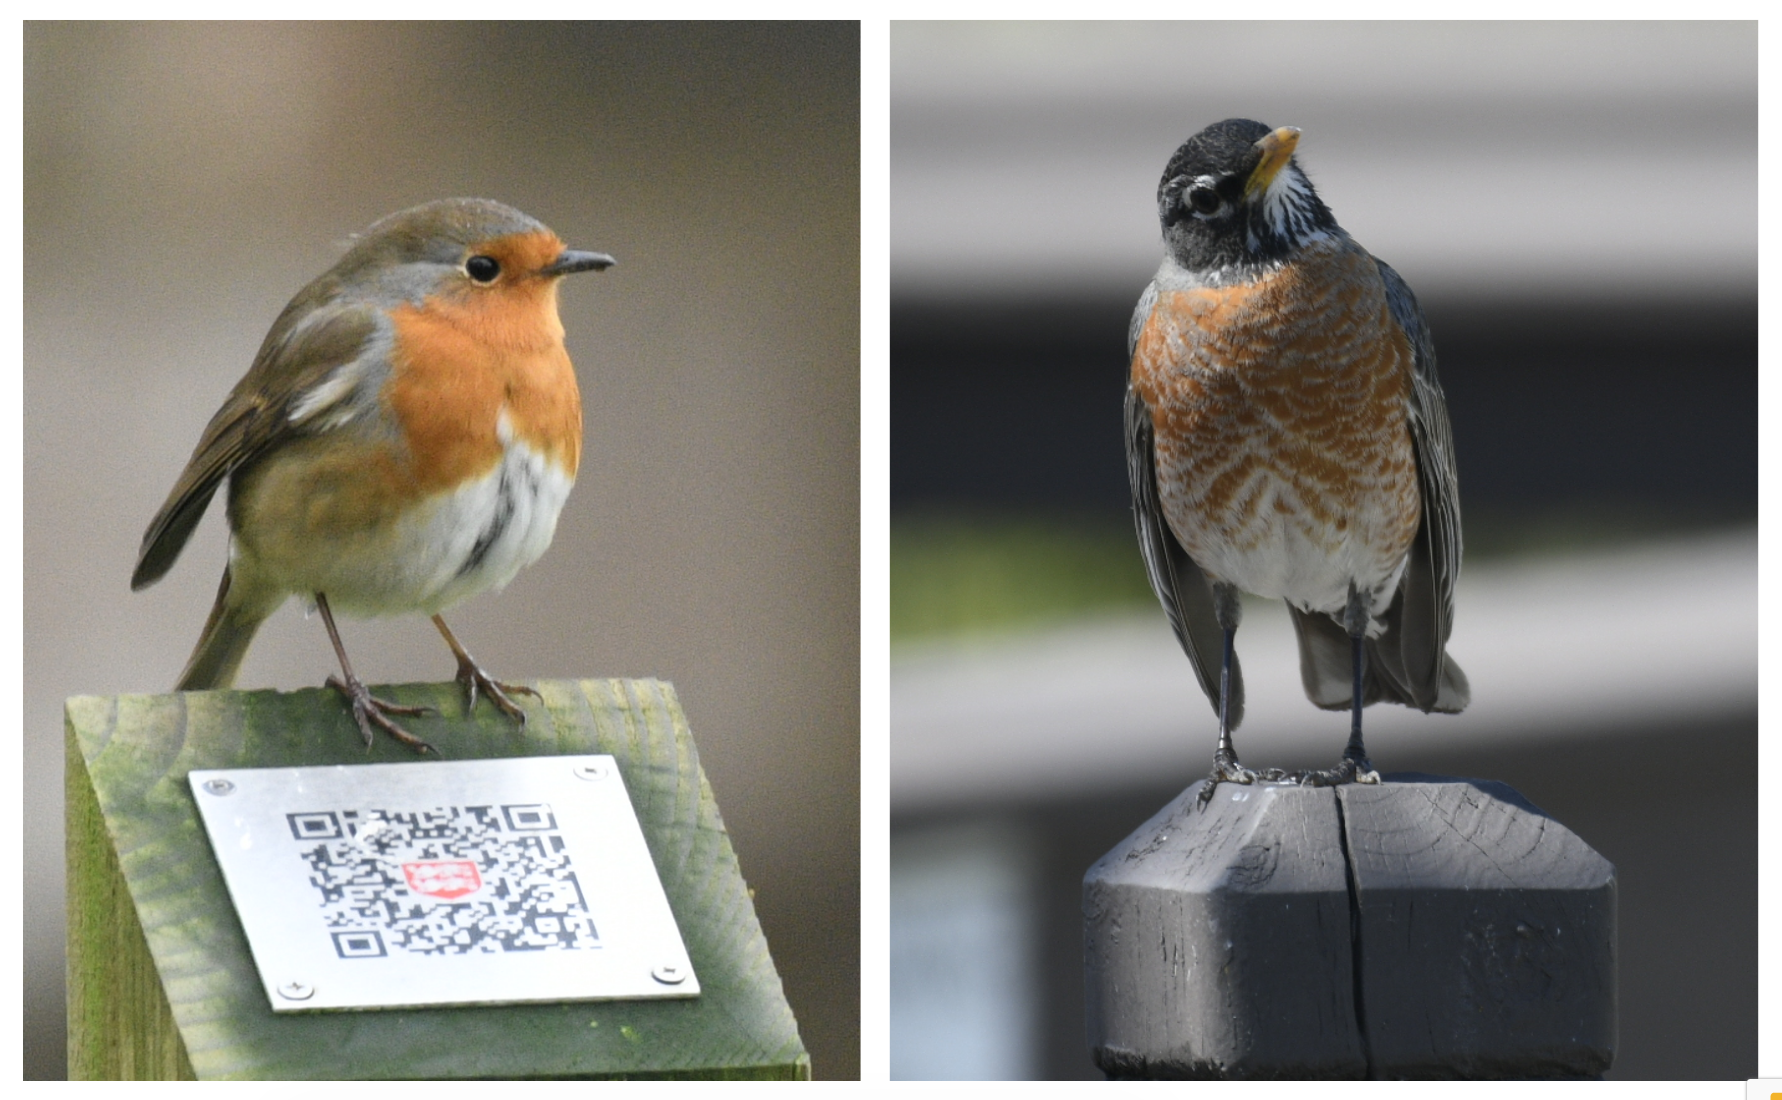 Juxtaposition of the European and American Robin